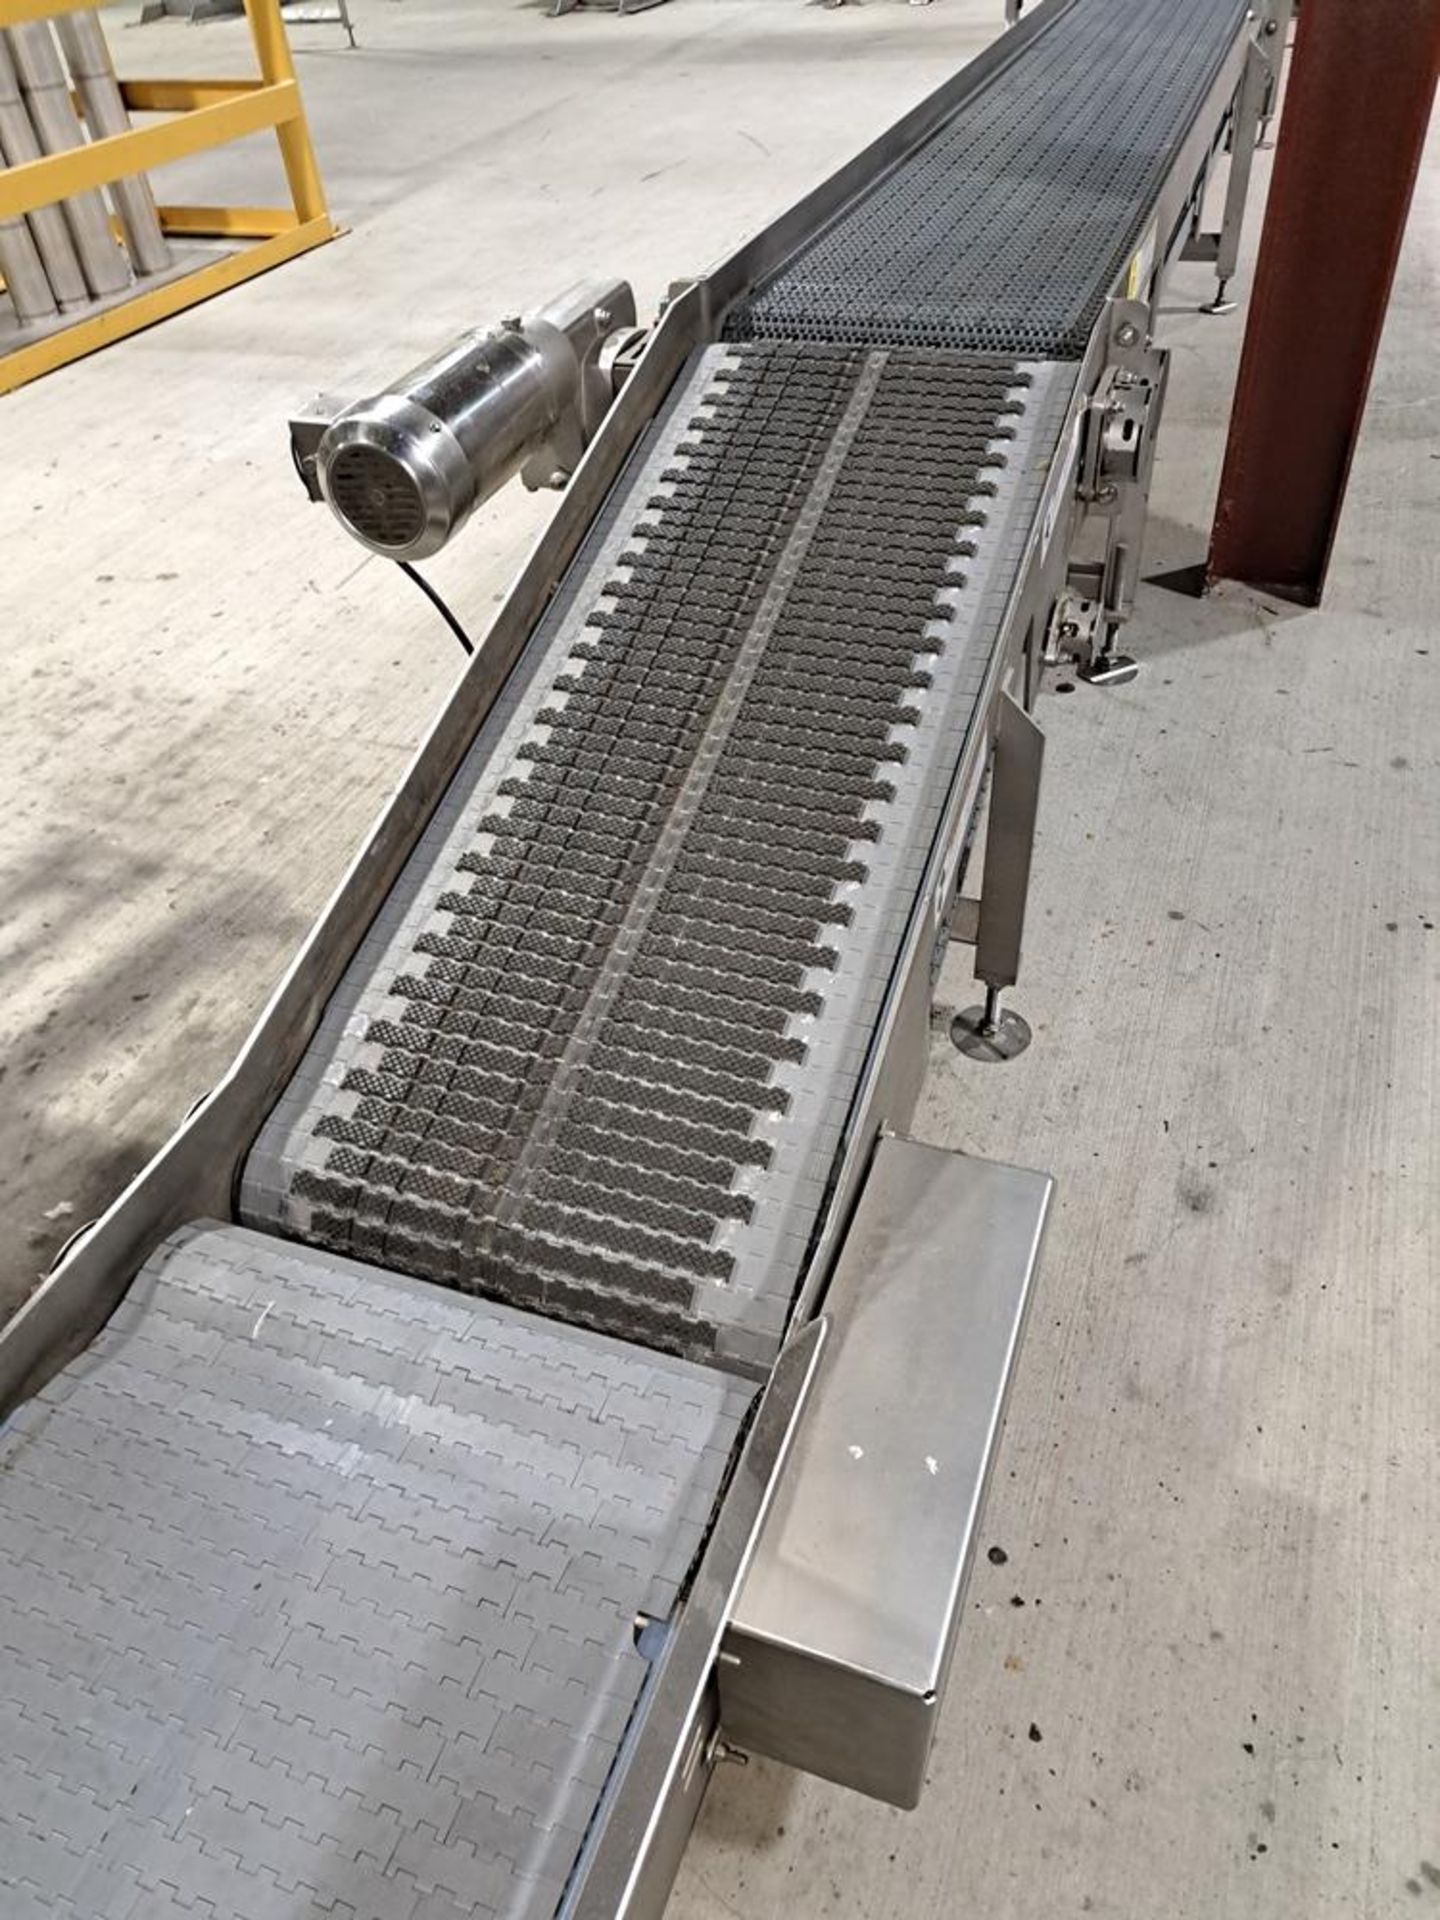 Stainless Steel Conveyor, 20" W X 18' L plastic belt, incline, stainless steel motor, 230/460 volts: - Image 2 of 2